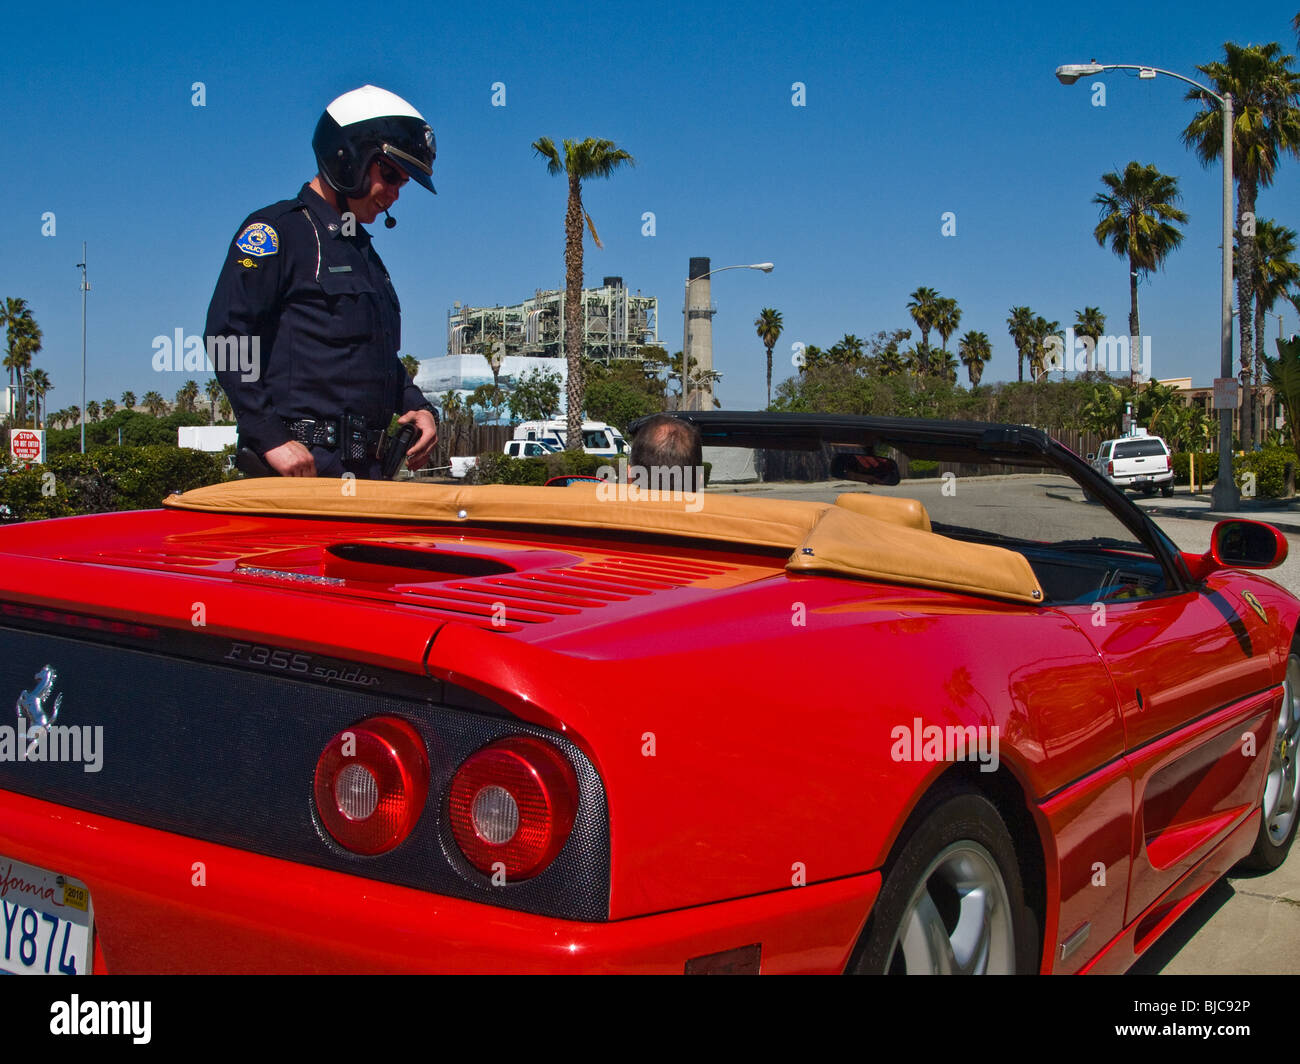 Motor officer confronts possible law breaker Stock Photo